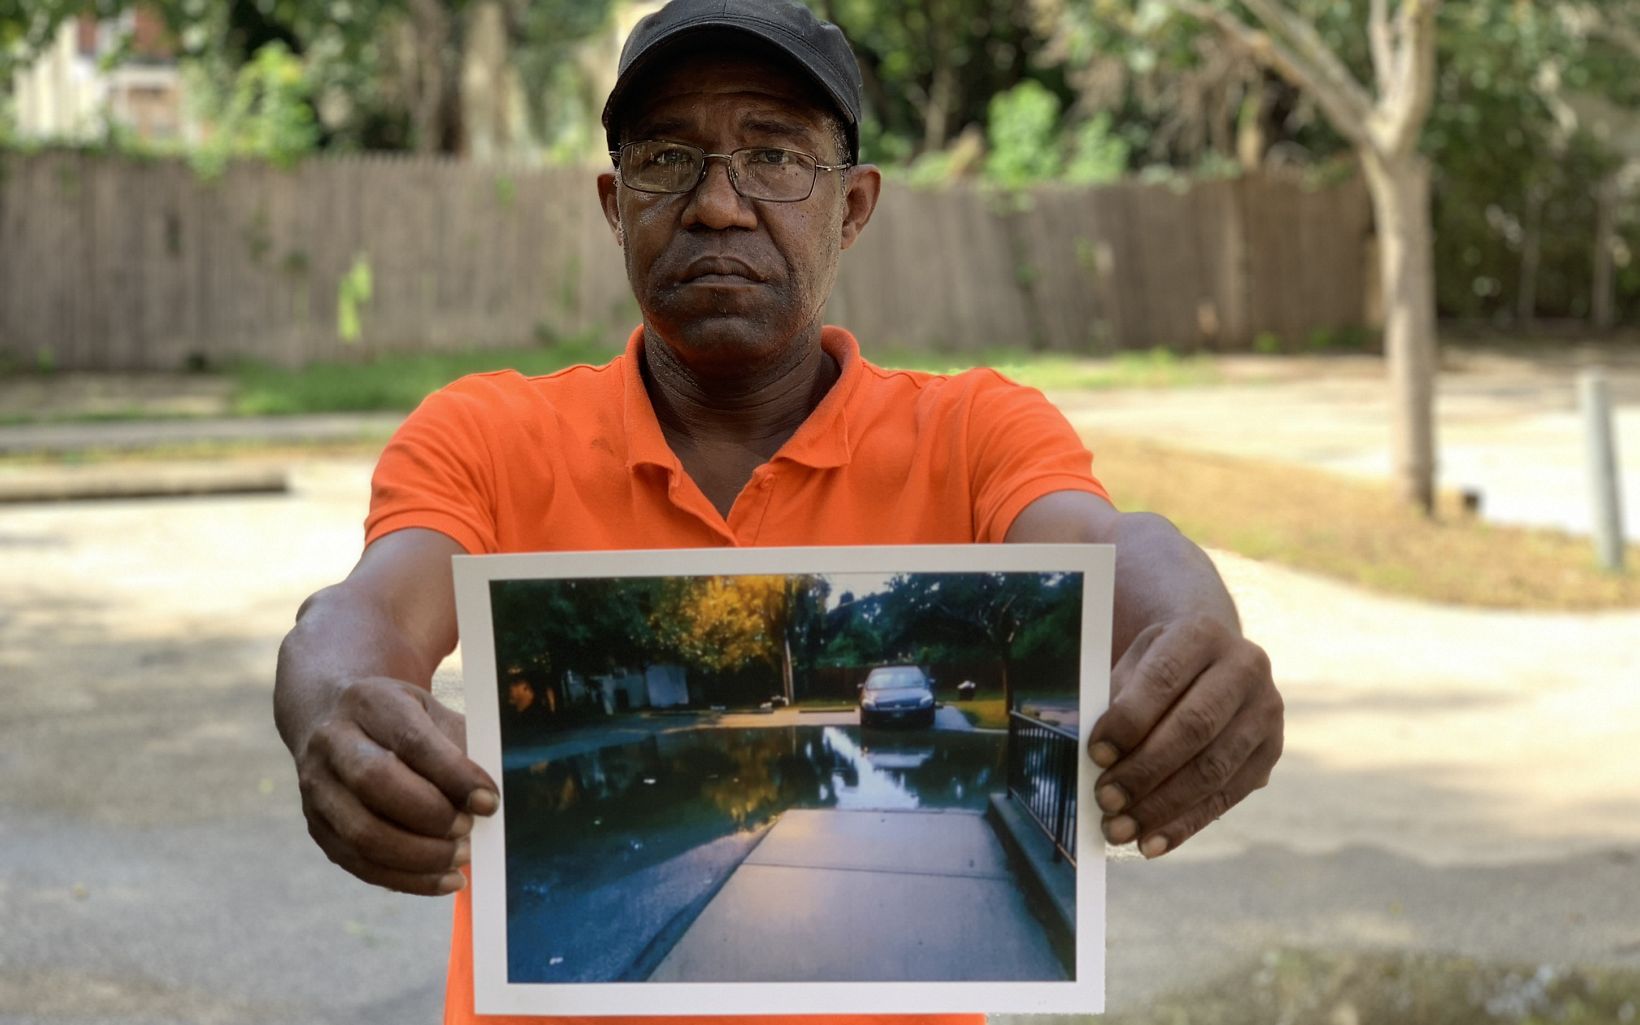 a man standing in the middle of a parking lot holds a photo of the parking flooded